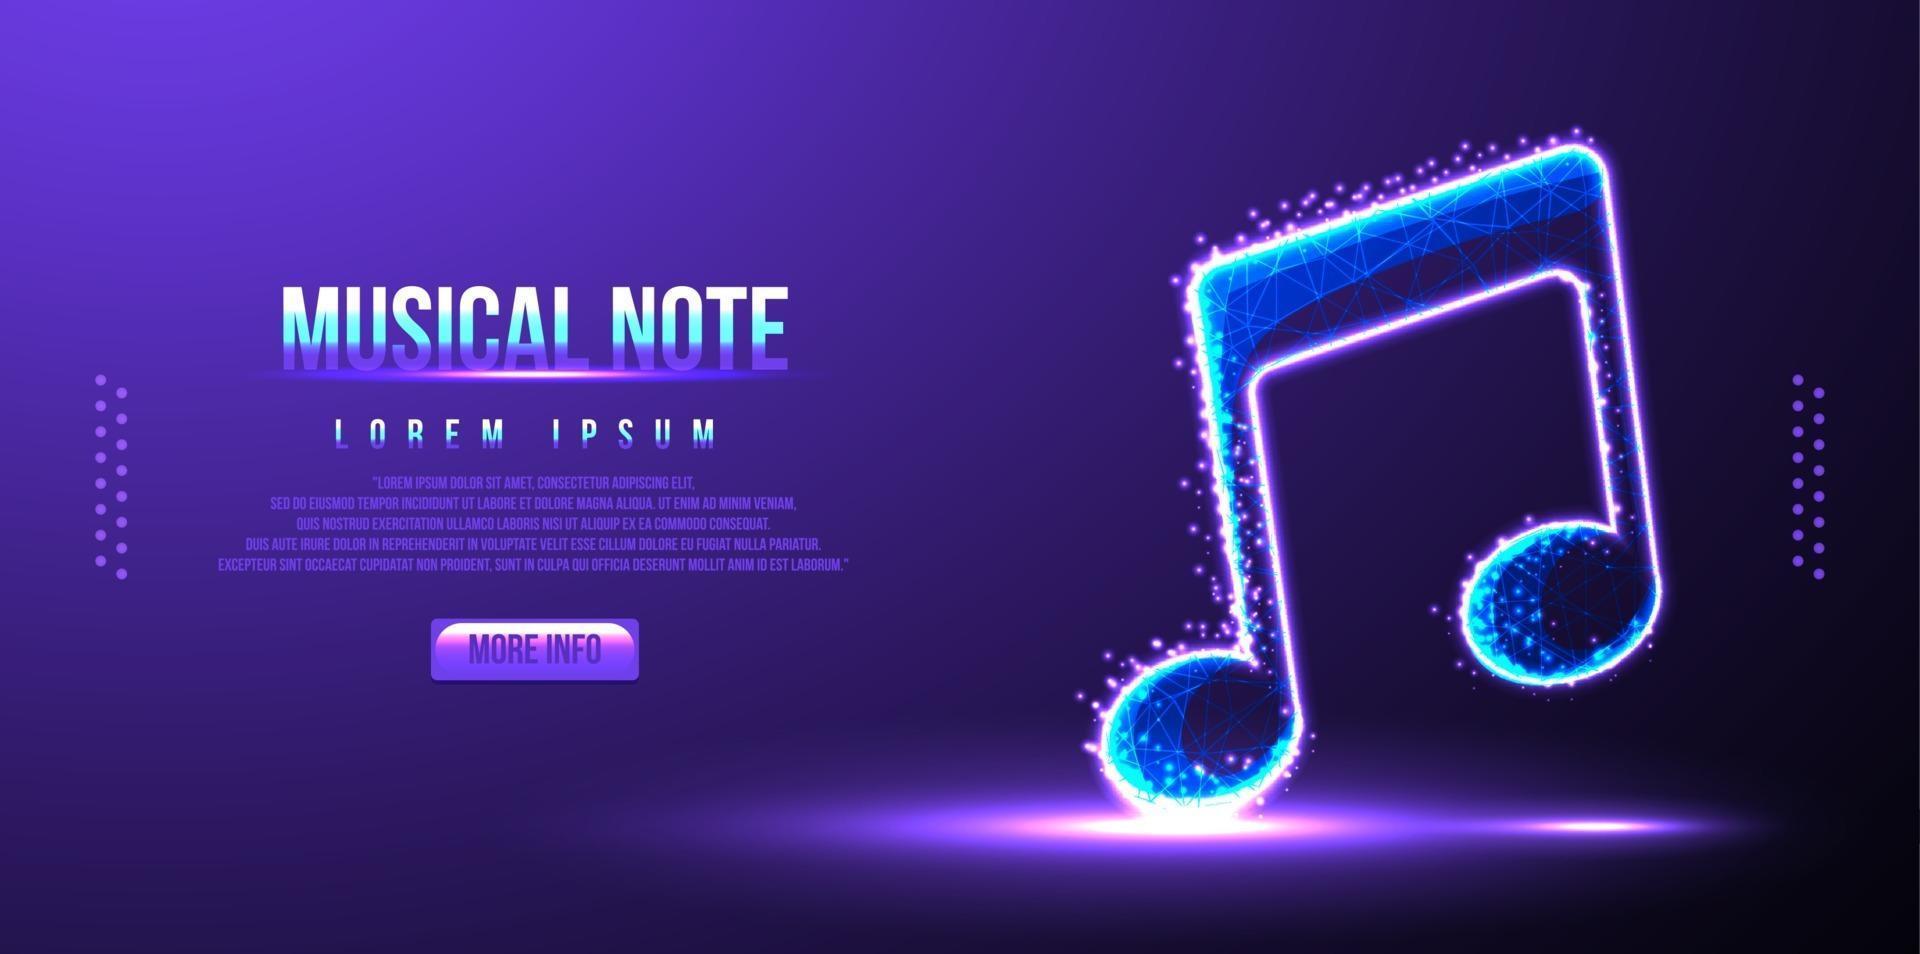 musical note, instrument low poly wireframe mesh vector illustration